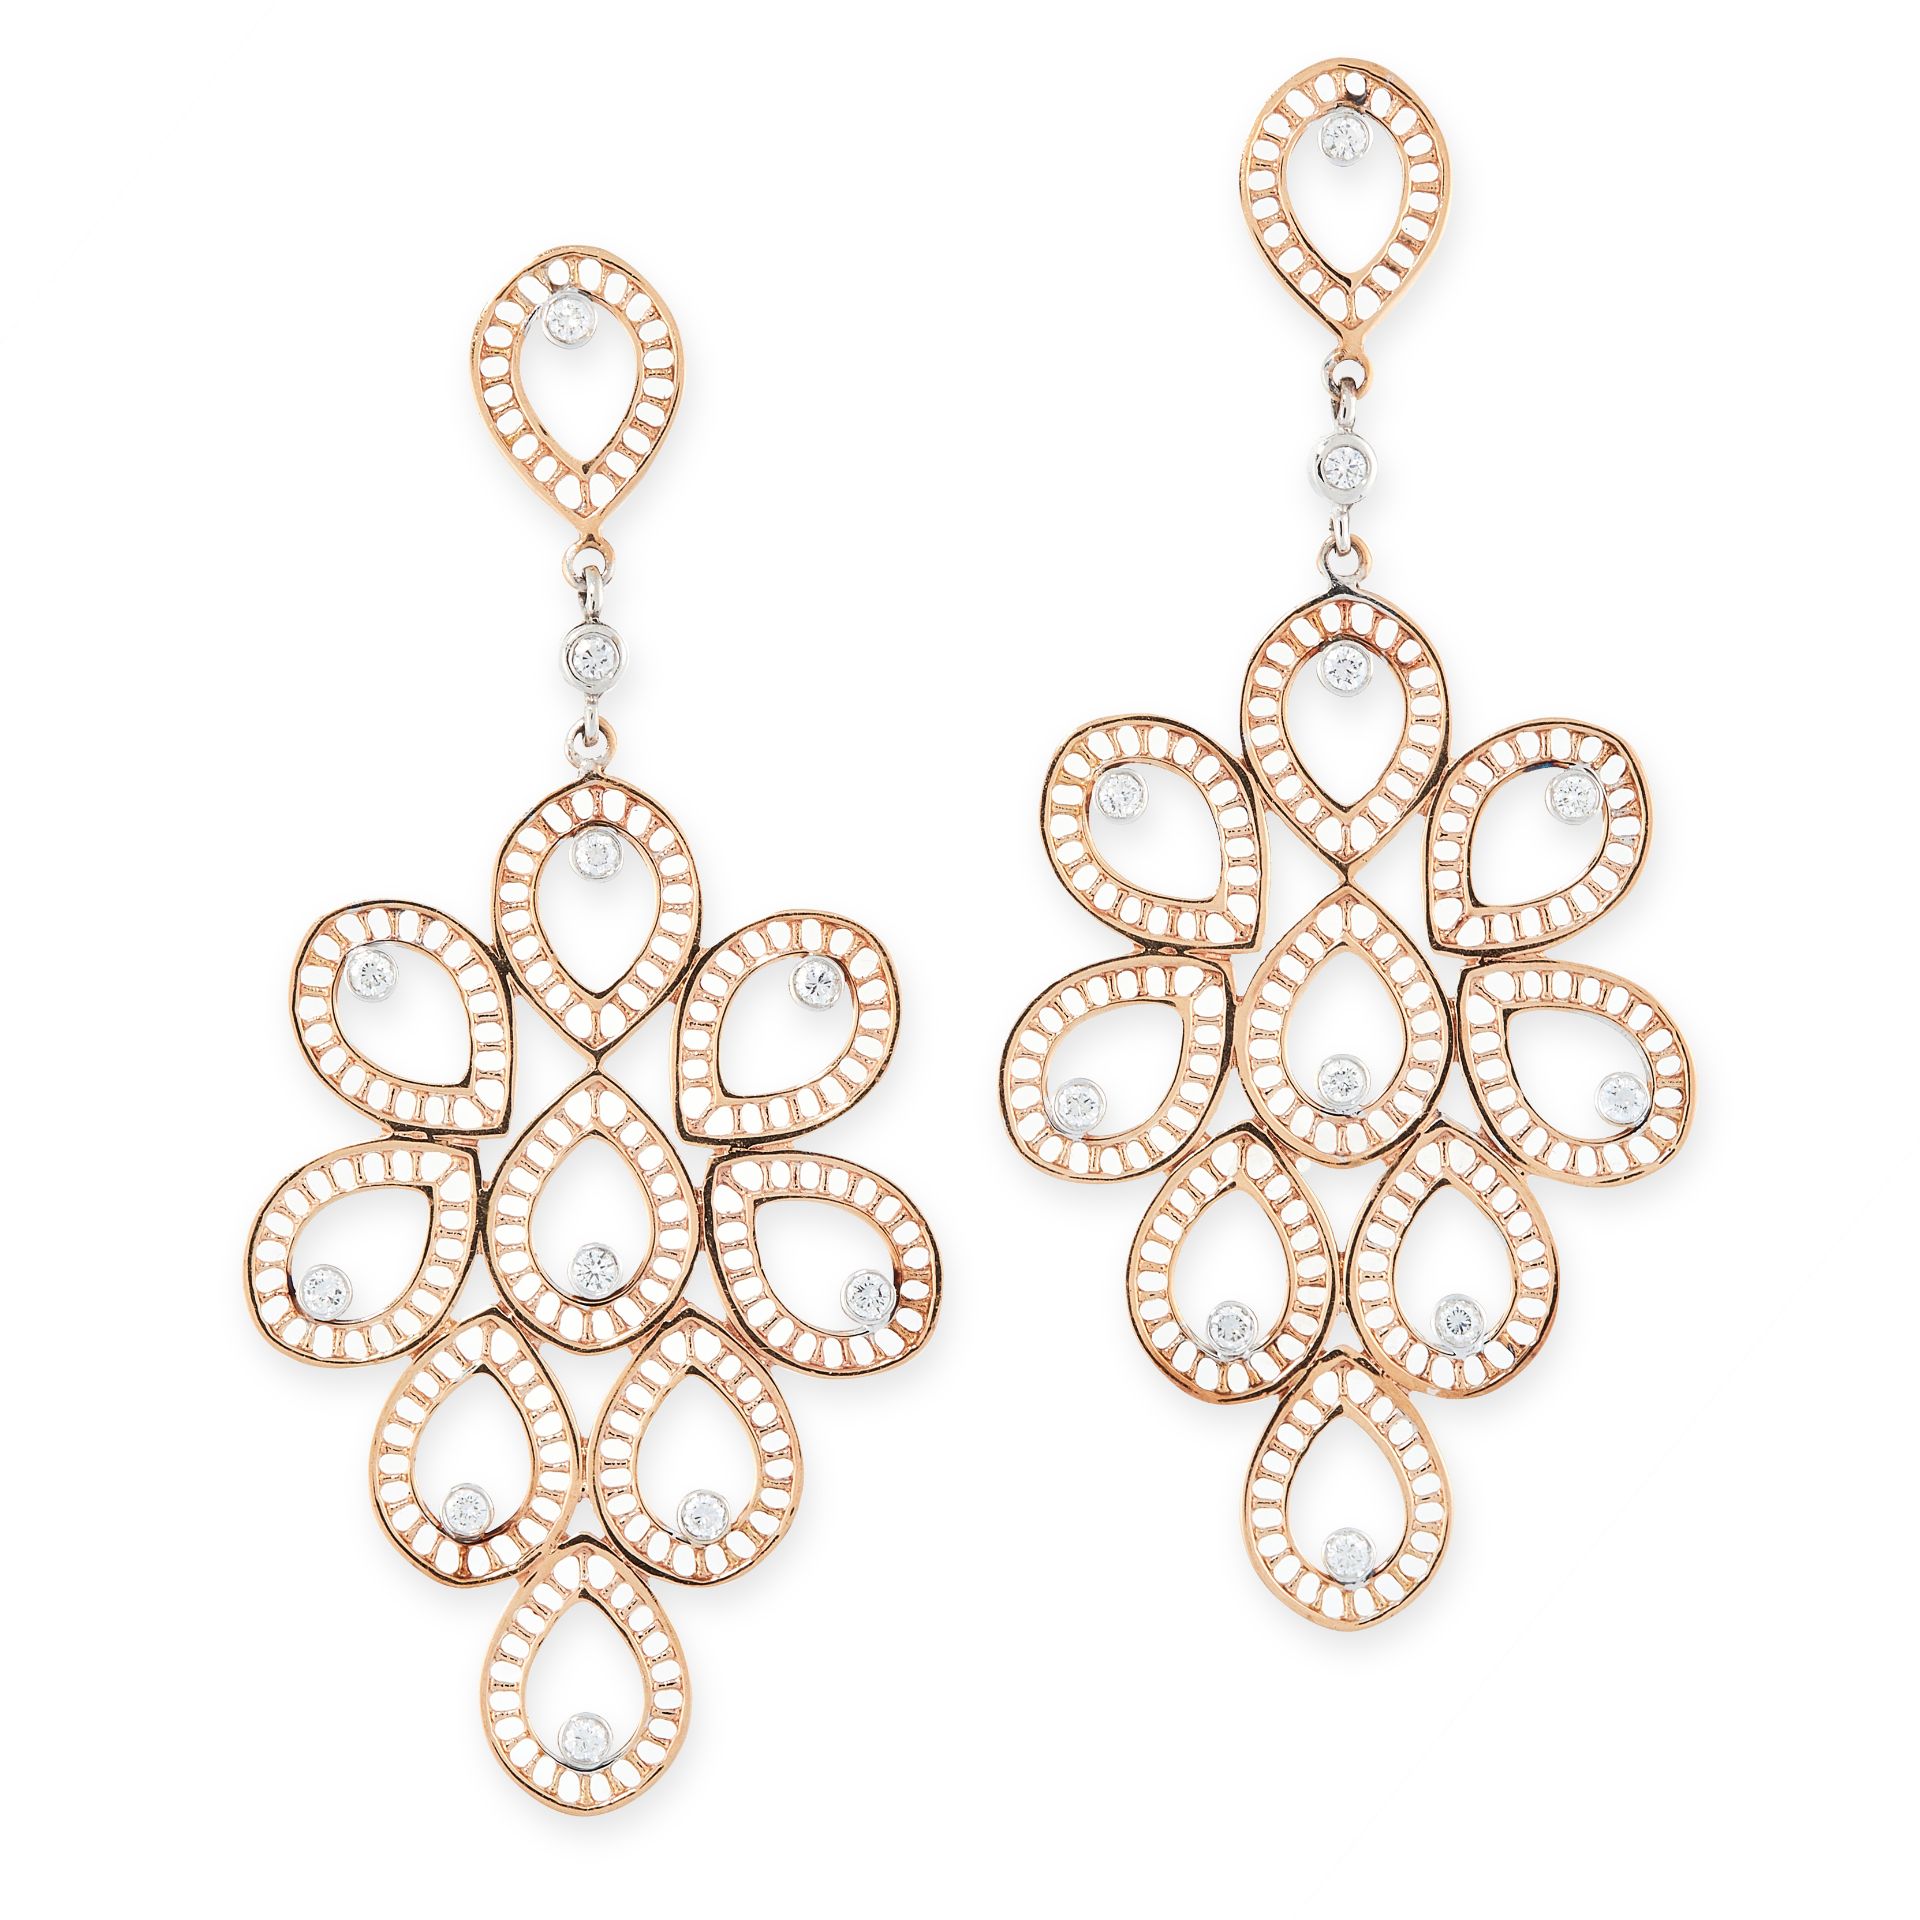 A PAIR OF DIAMOND EARRINGS in yellow gold, each designed as a cluster of pear shaped motifs set with